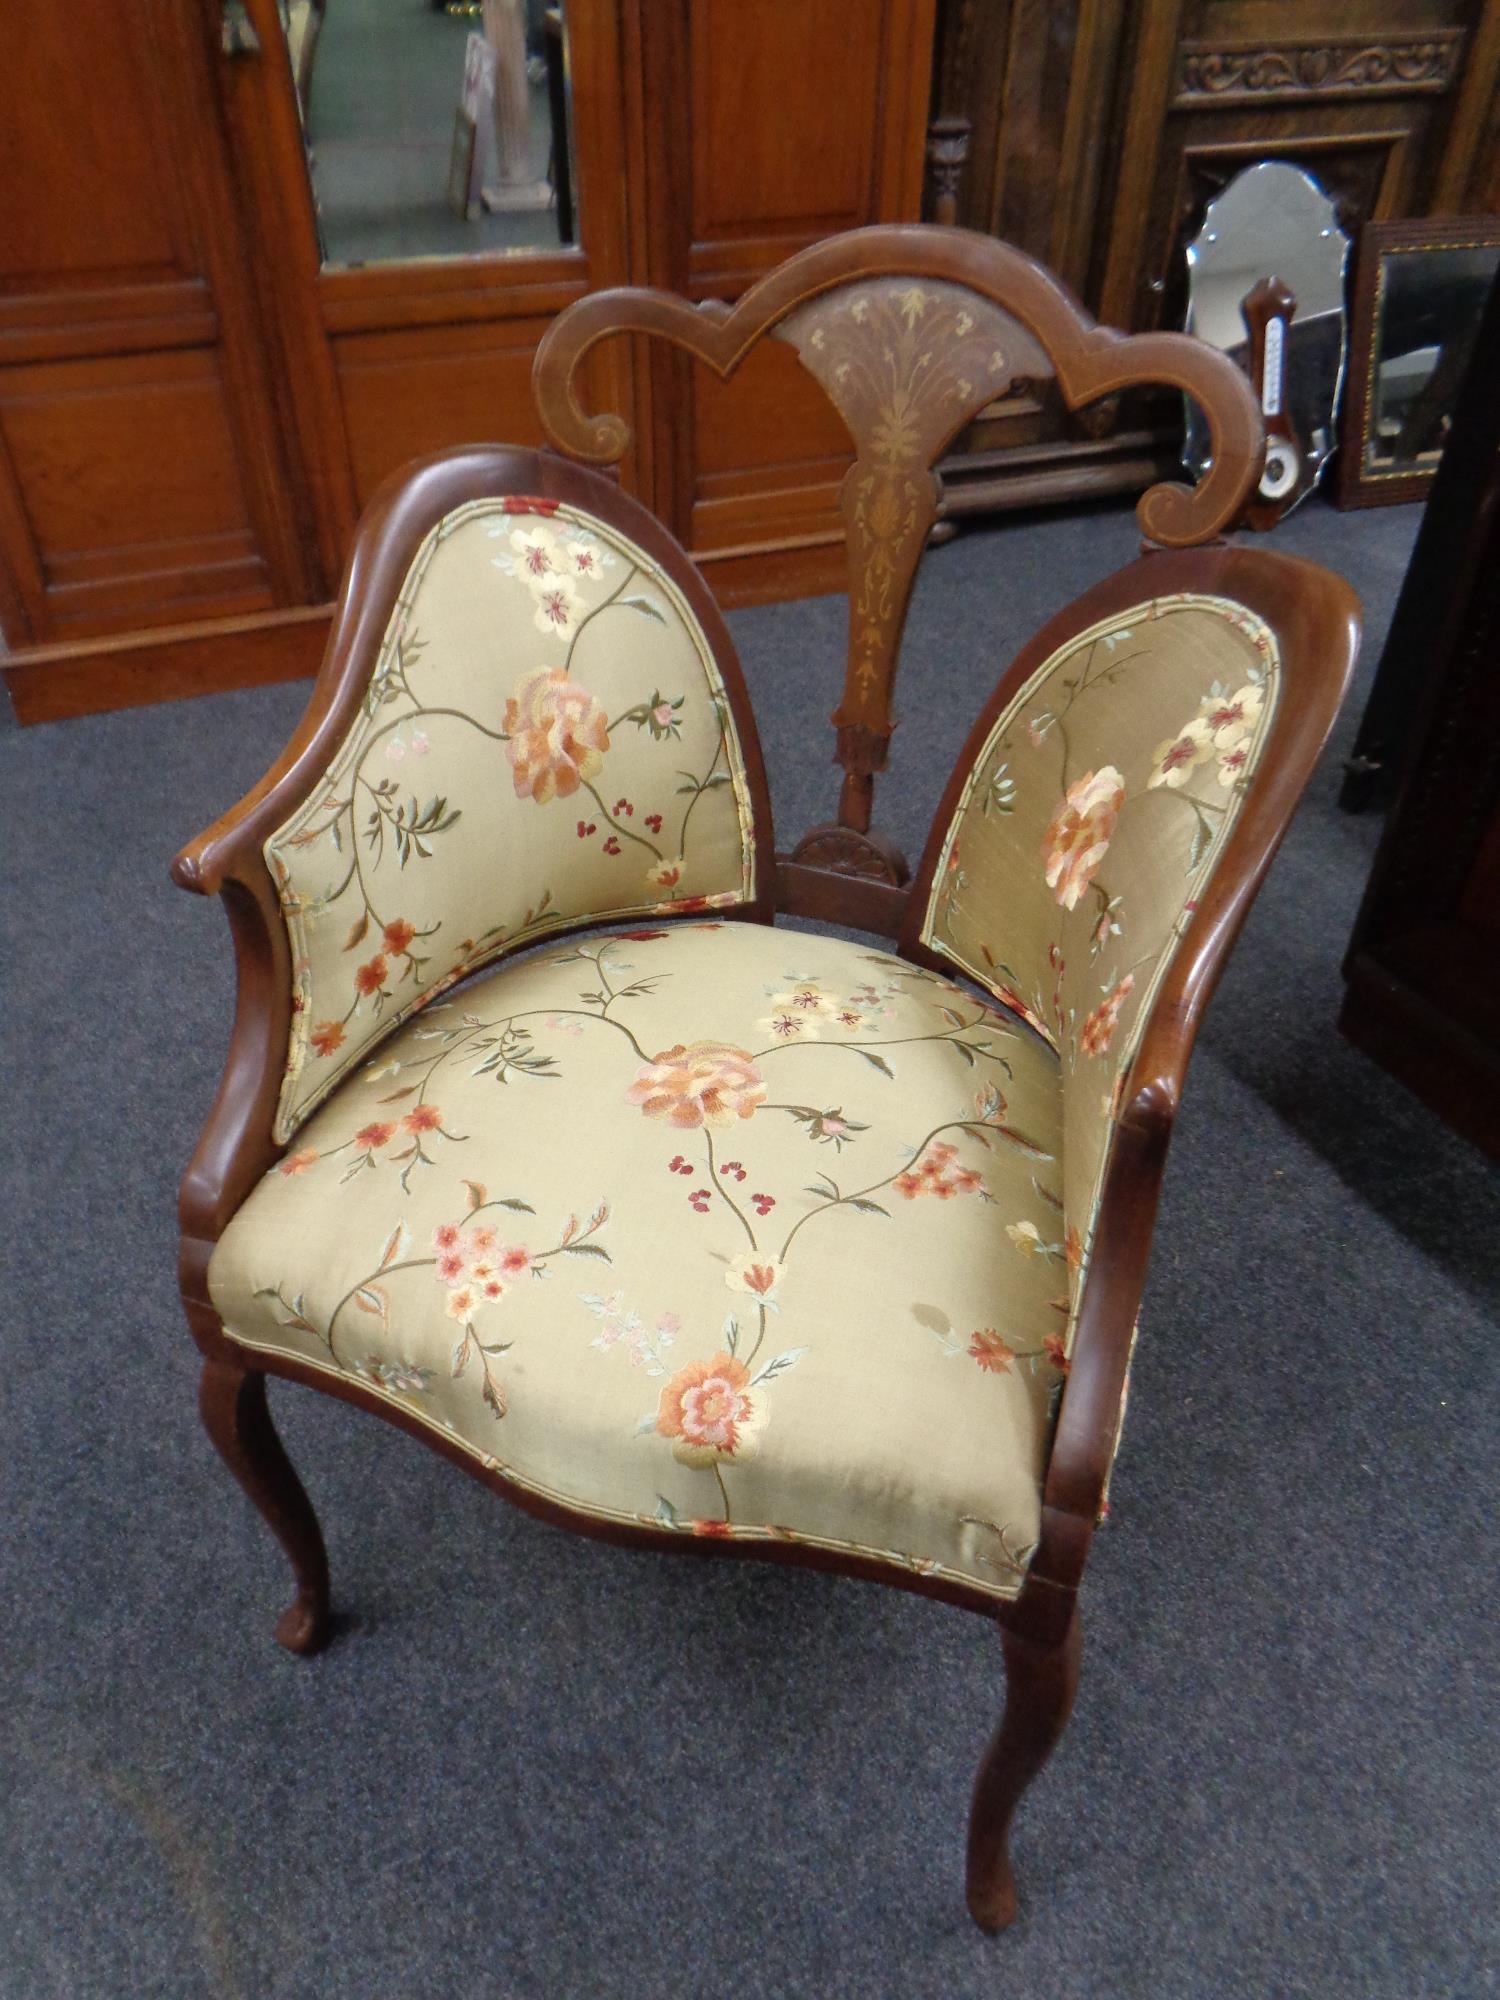 An Edwardian inlaid mahogany Sheraton style armchair upholstered in a floral tapestry fabric